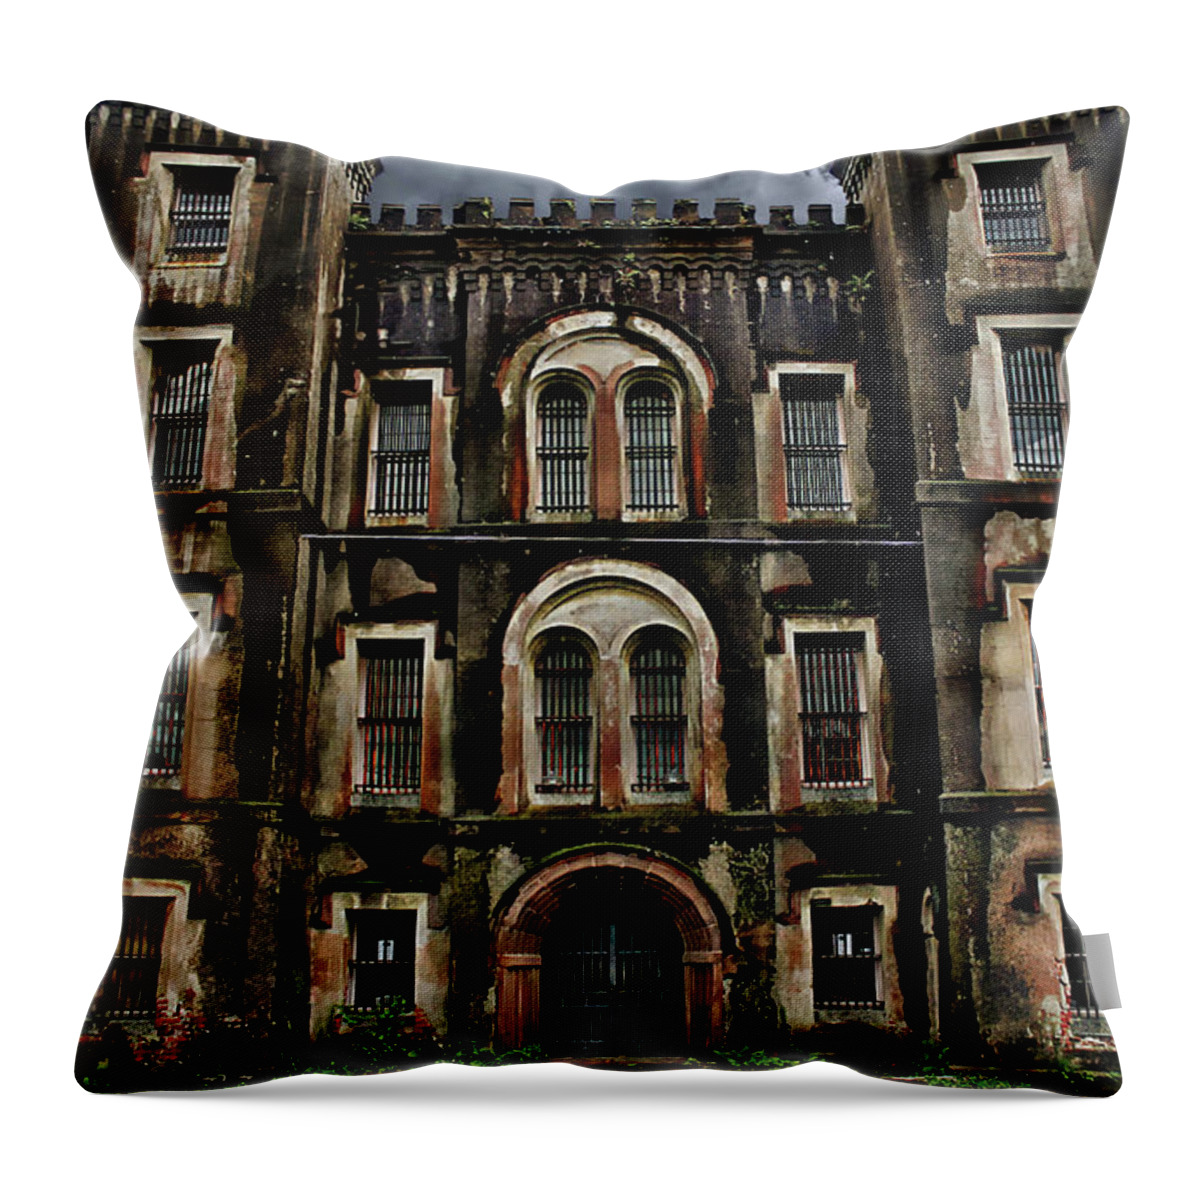 Old City Jail Throw Pillow featuring the photograph Old City Jail by Jessica Brawley